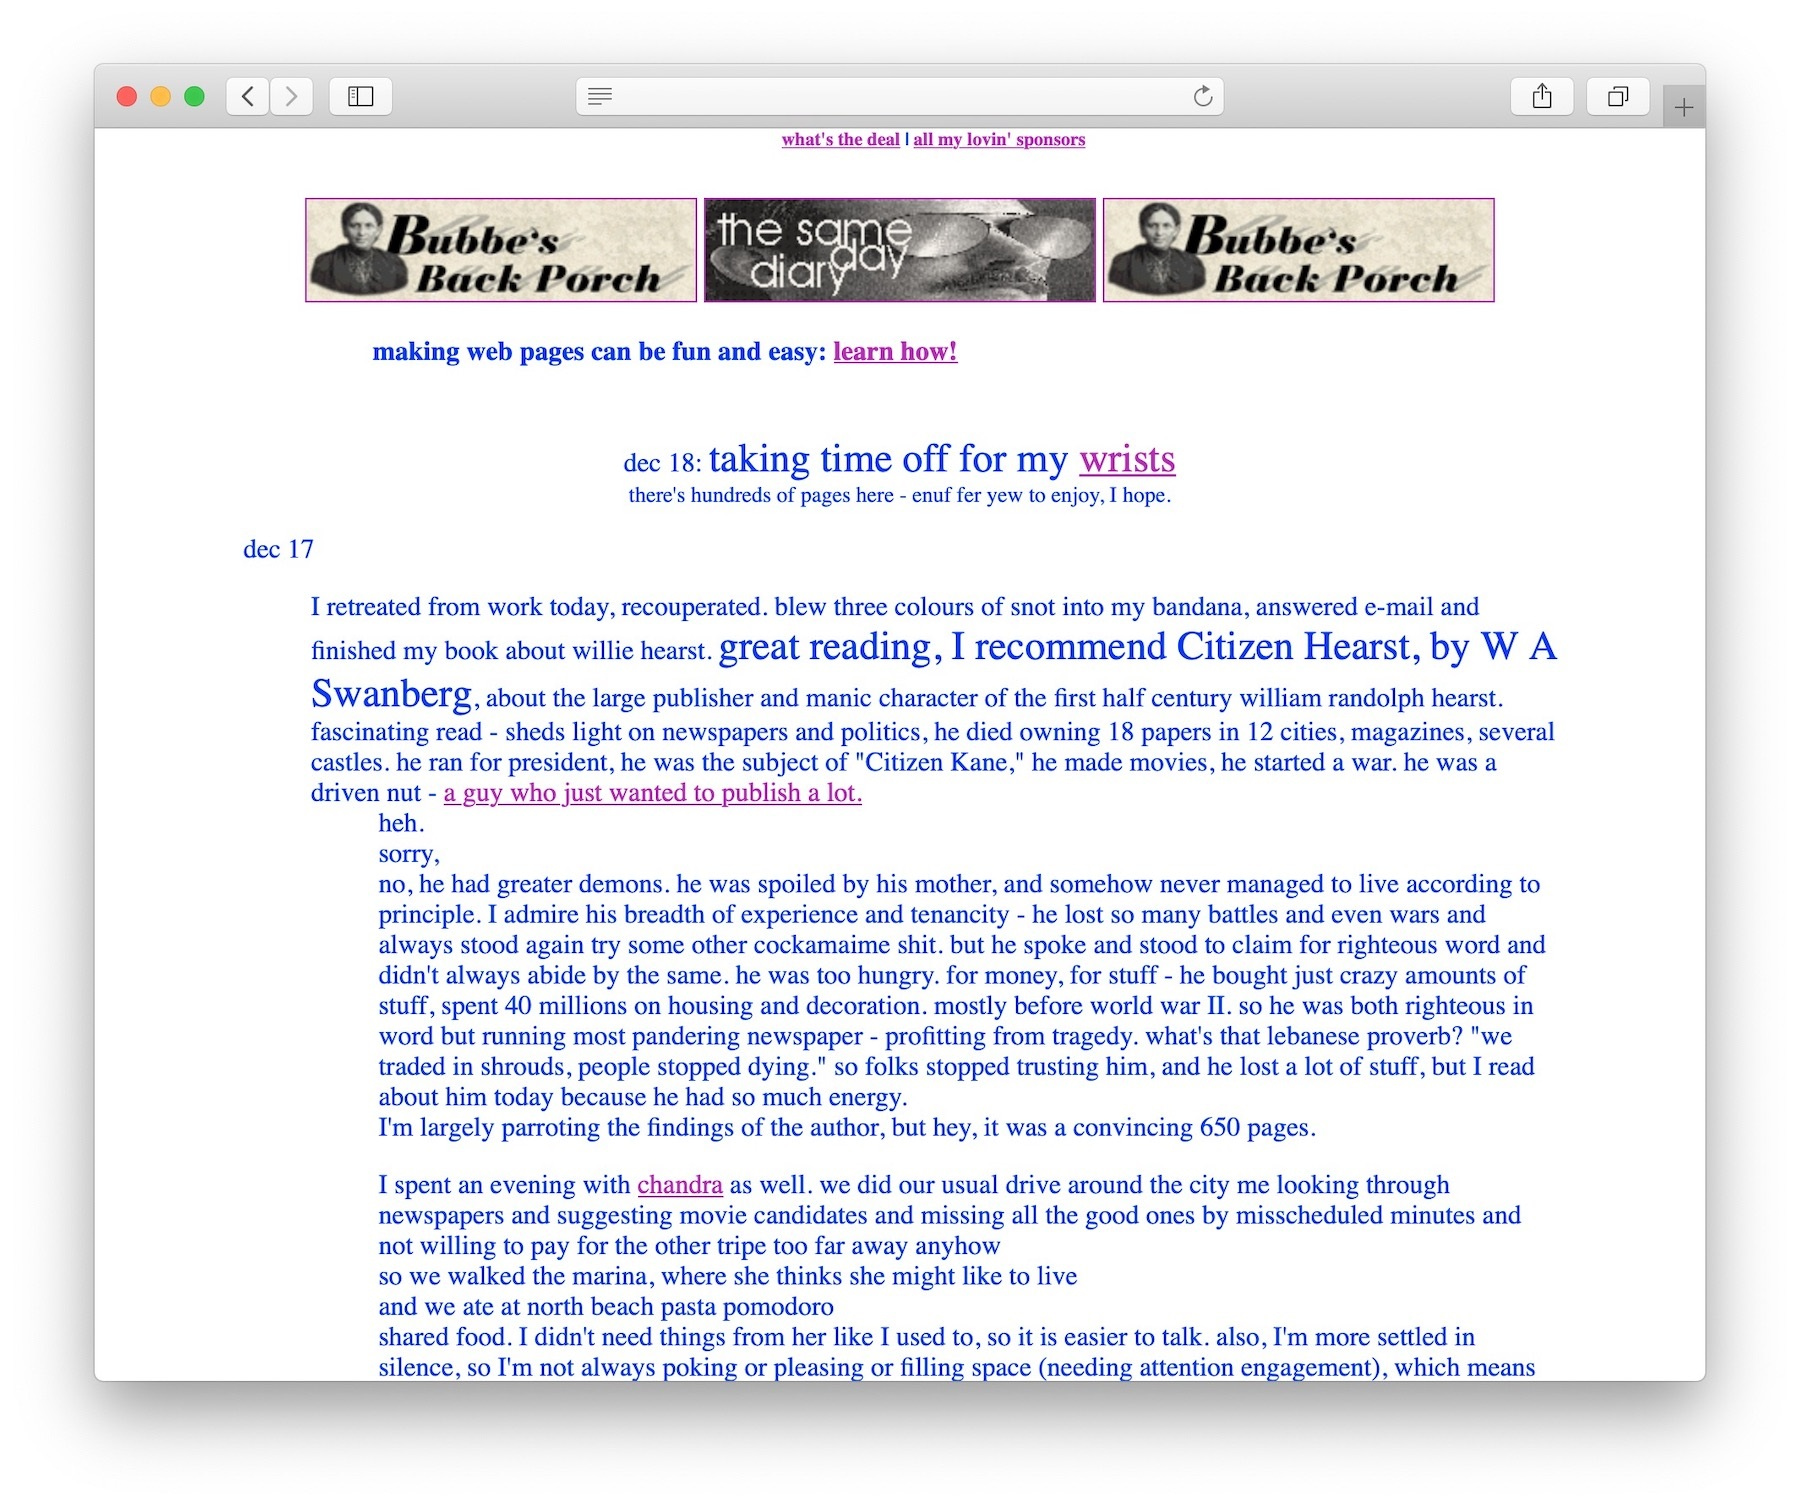 The History of Blogging: From 1997 Until Now (With Pictures)